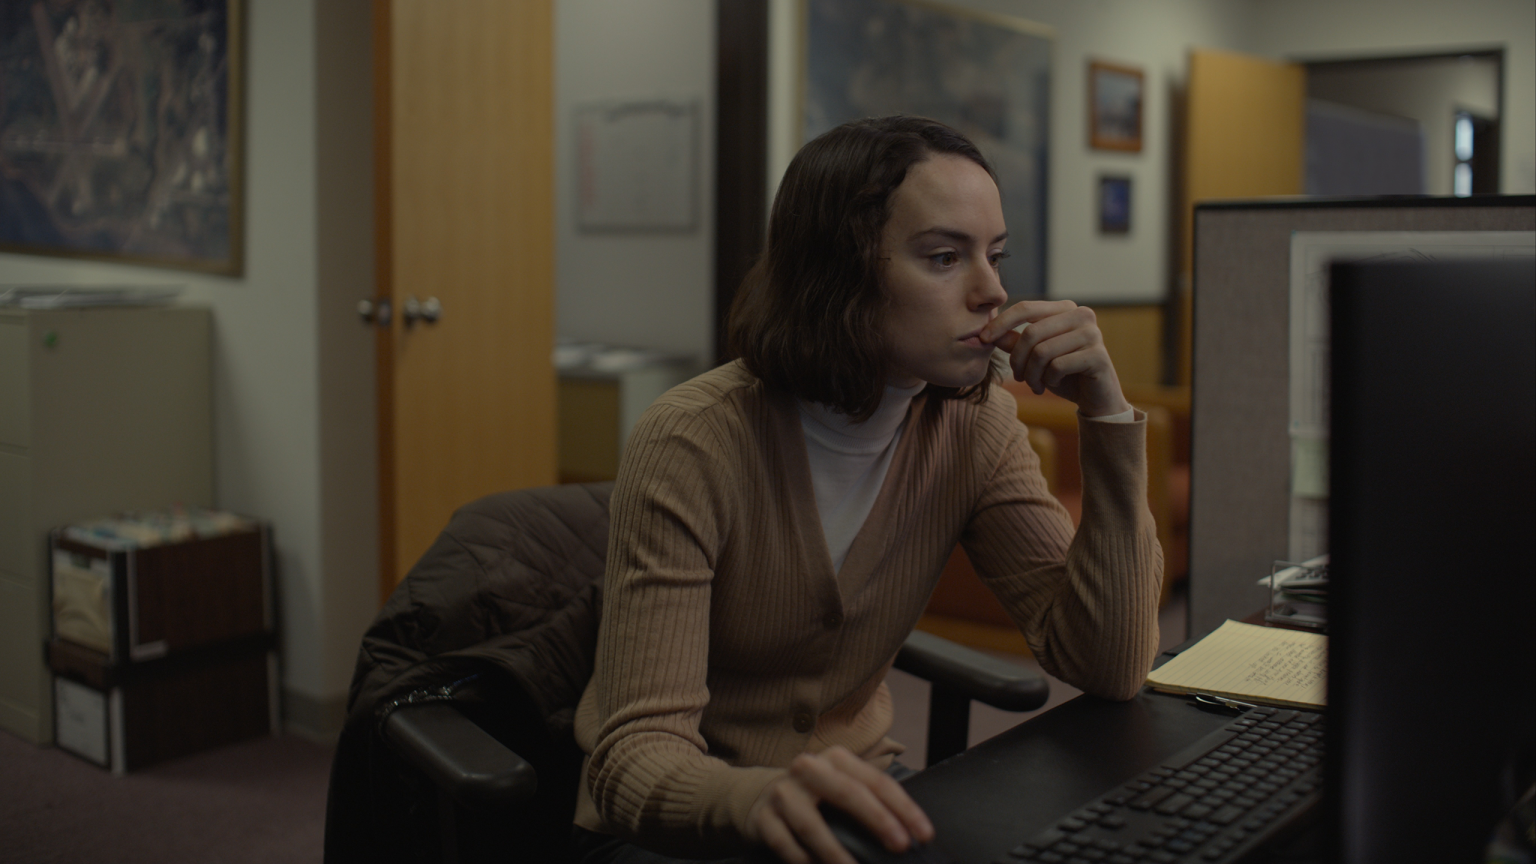 Daisy Ridley stars as the lonely Fran working at her mundane Oregon bay office in silence in the romantic dramedy feature film SOMETIMES I THINK ABOUT DYING.